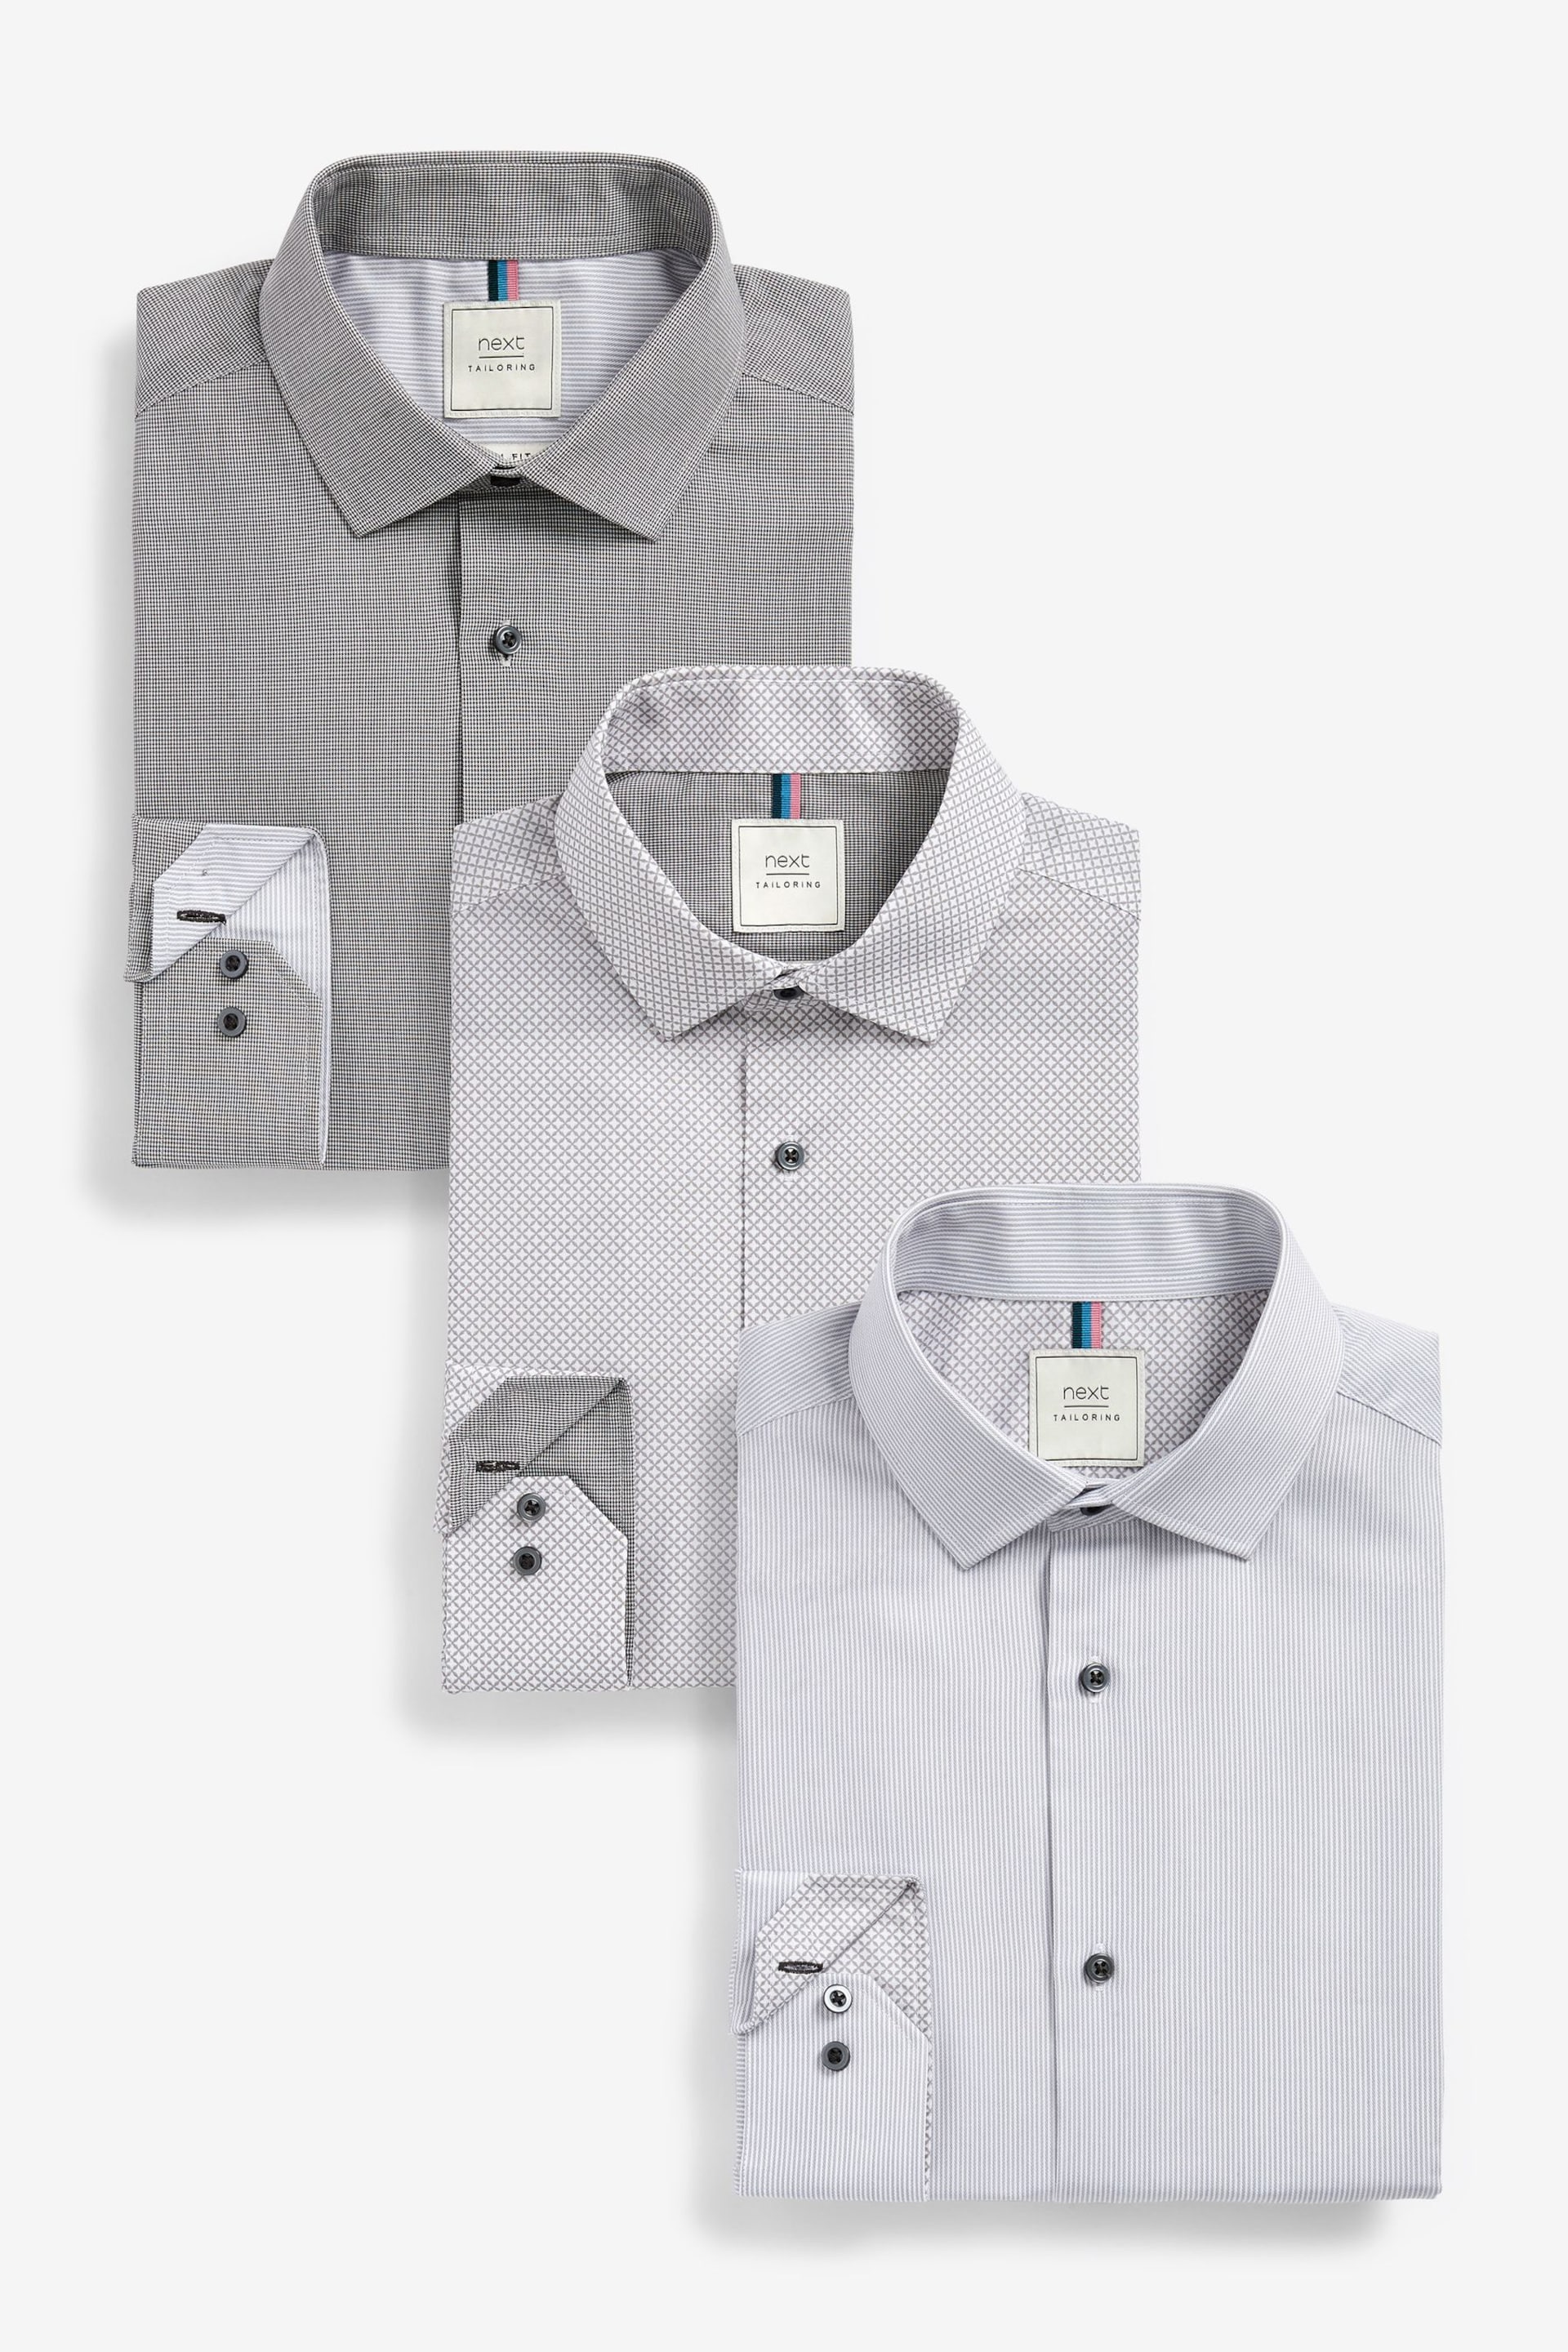 Grey Slim Fit Single Cuff Easy Care Shirts 3 Pack - Image 6 of 15